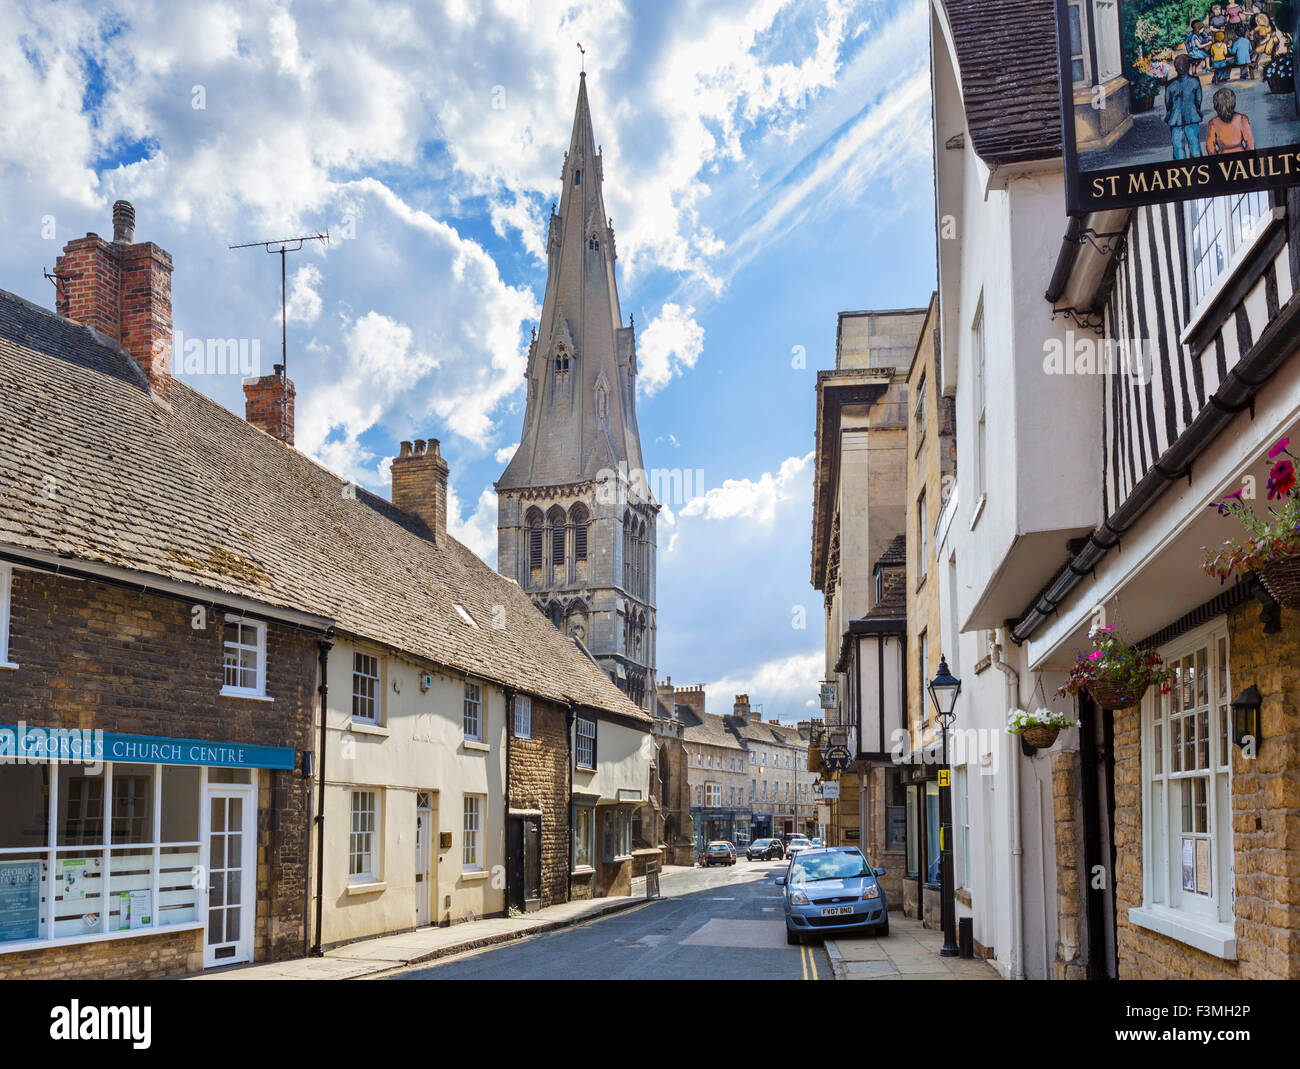 St Mary's Street et de l'église St Mary, Stamford, Lincolnshire, Angleterre, RU Banque D'Images